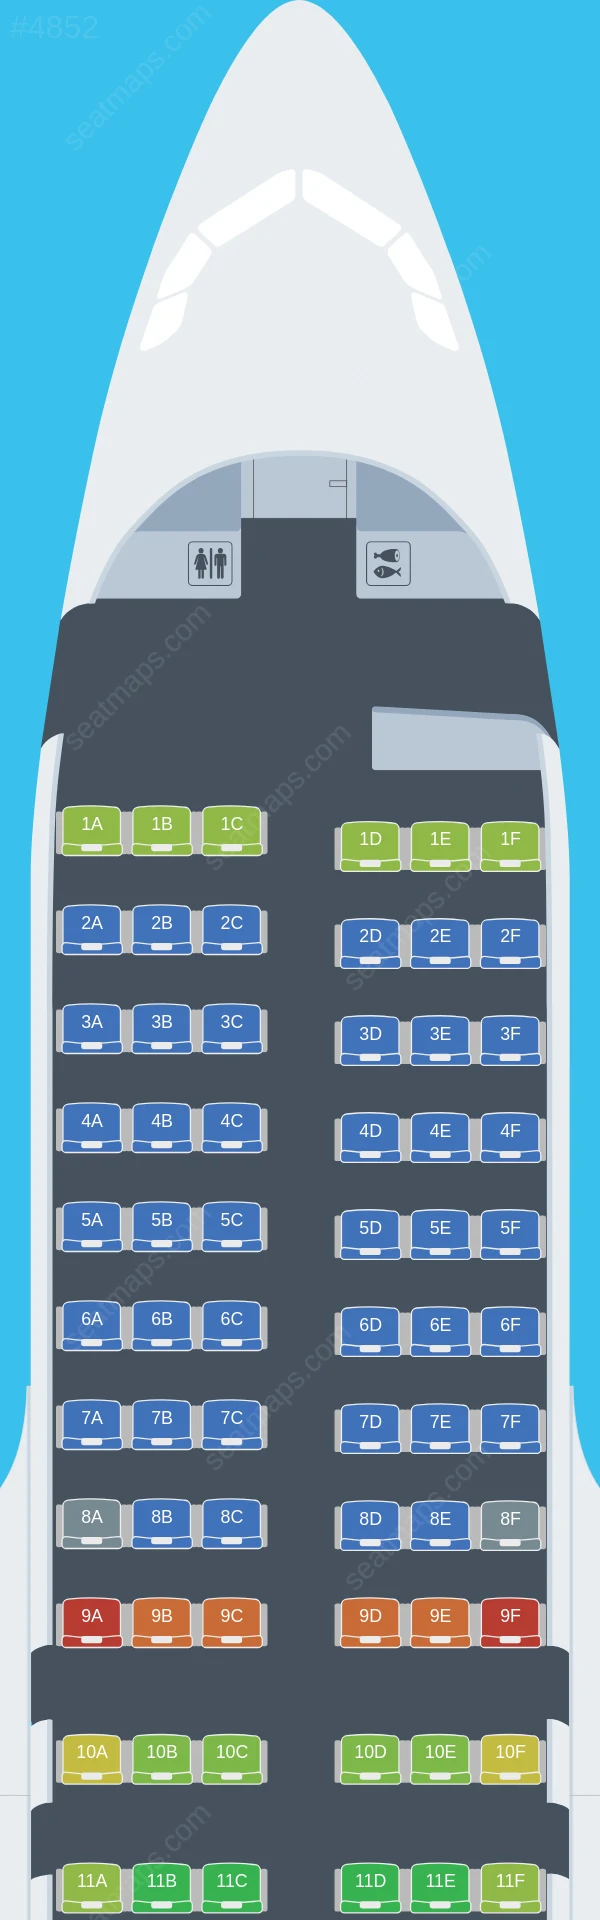 easyJet Switzerland Airbus A319-100 seatmap preview